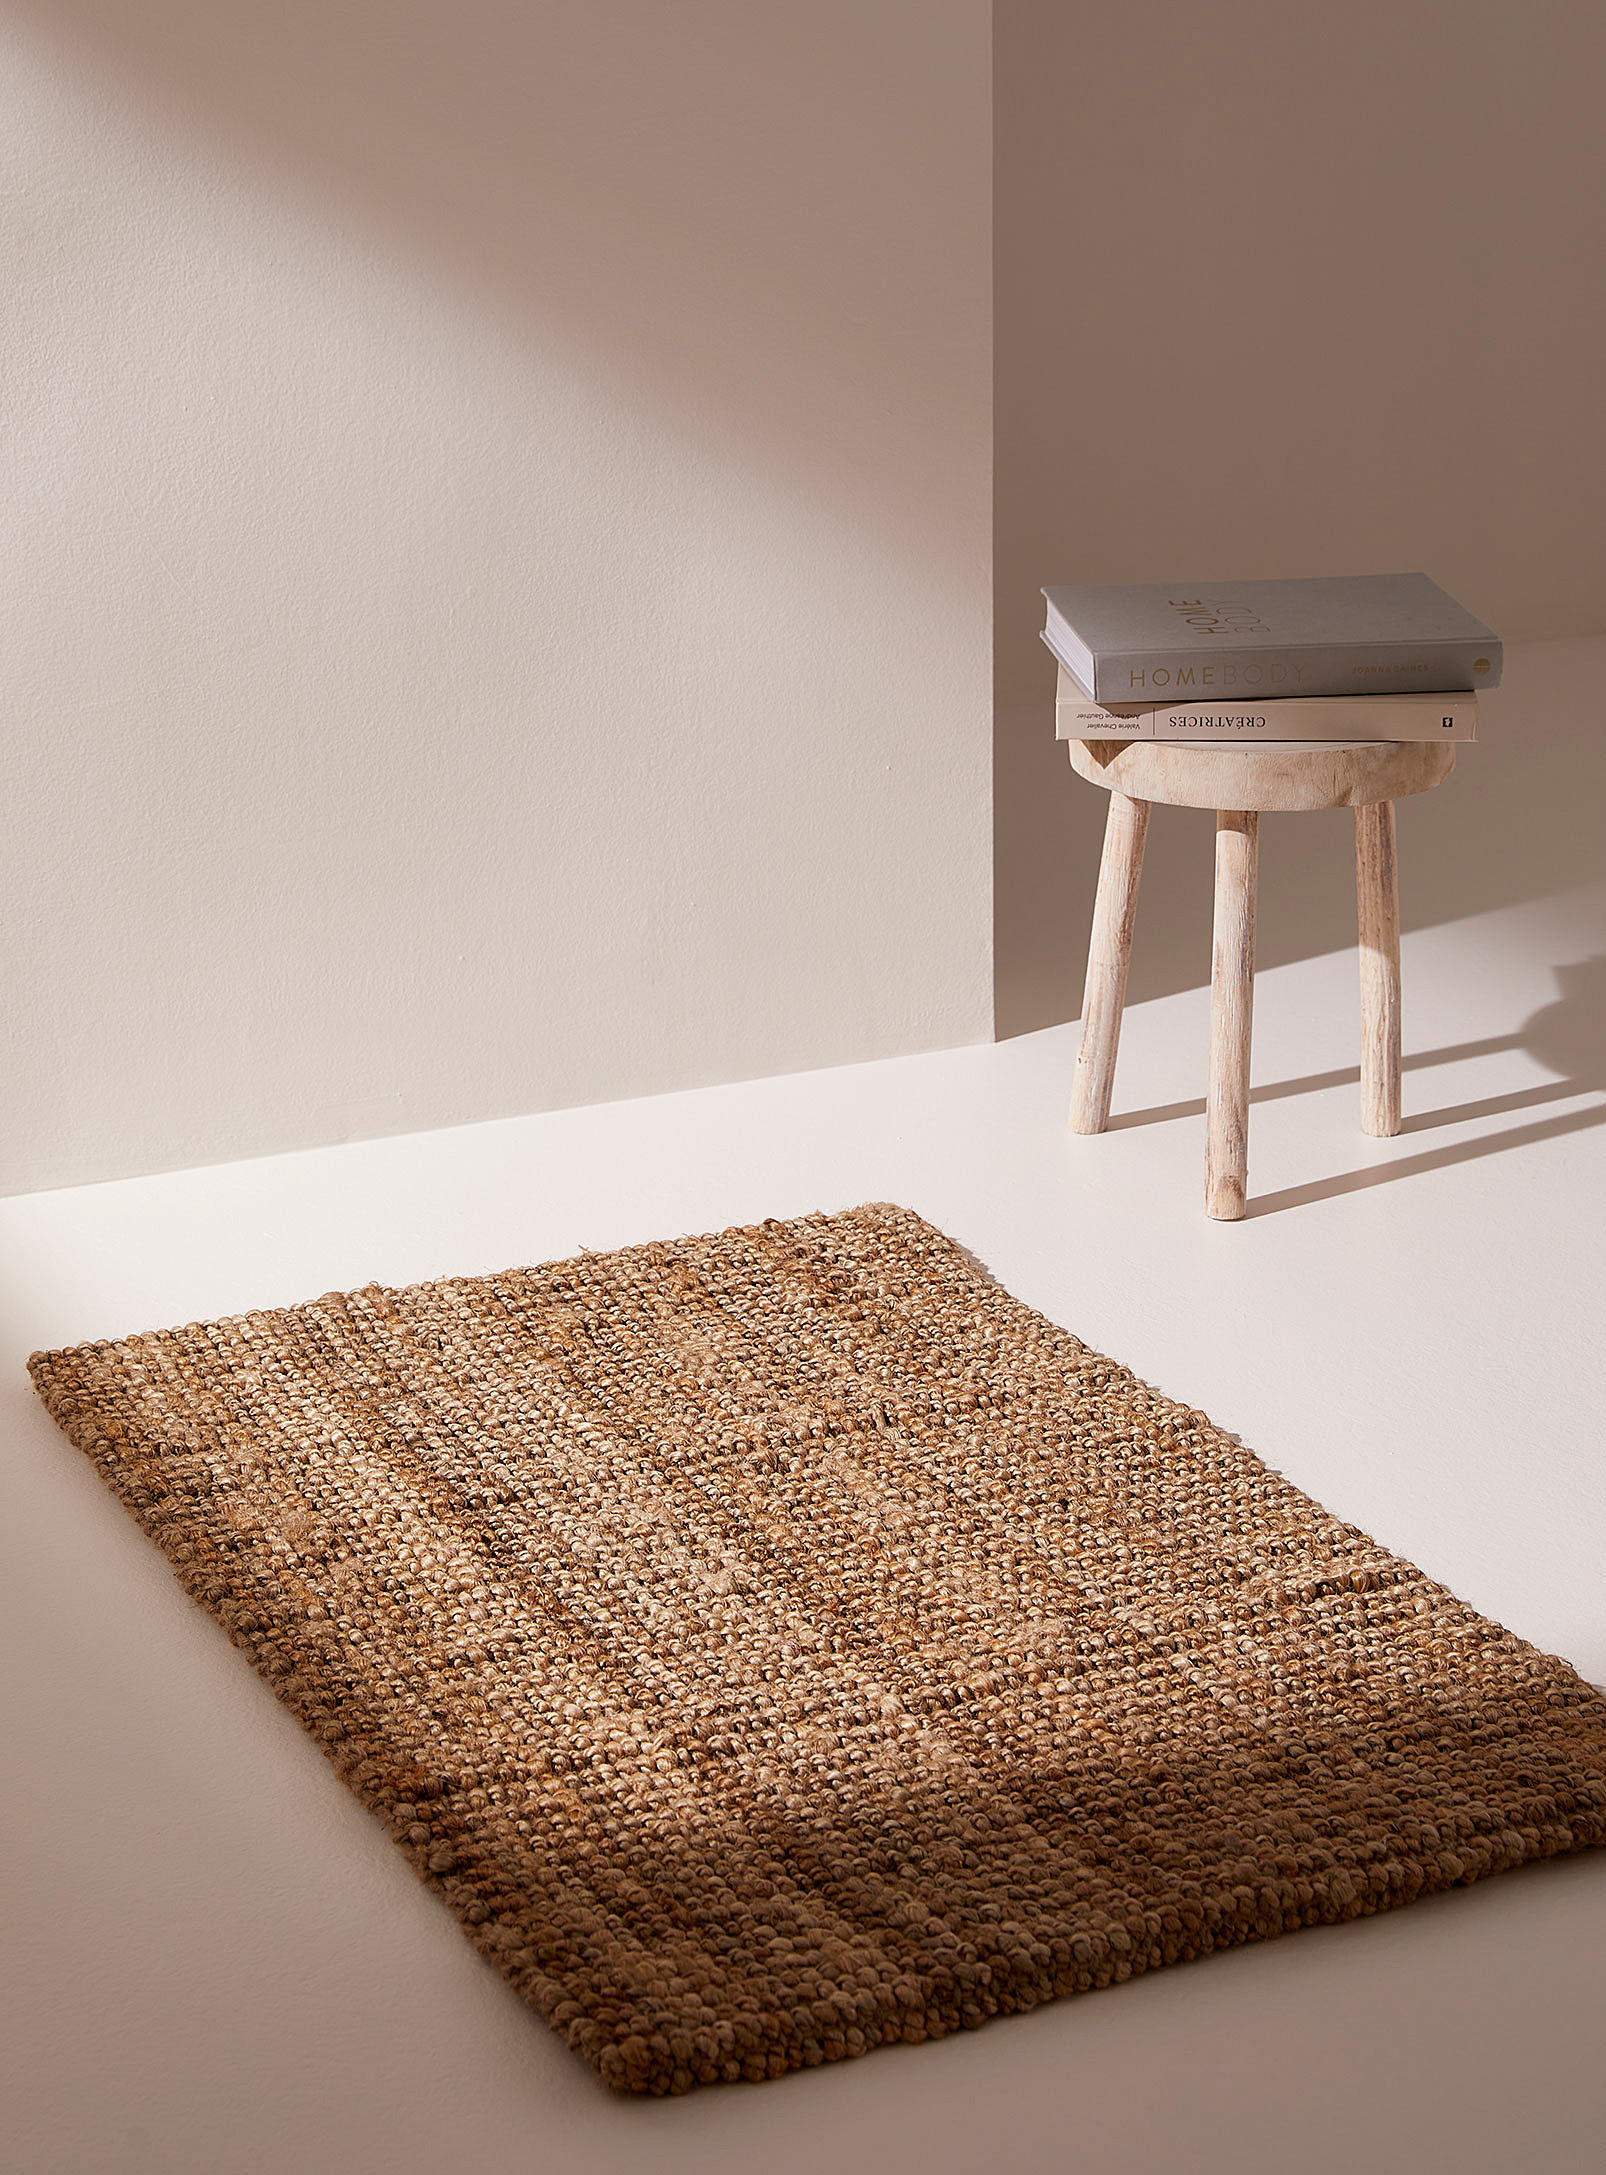 Simons Maison - Textured stripe jute accent rug See available sizes